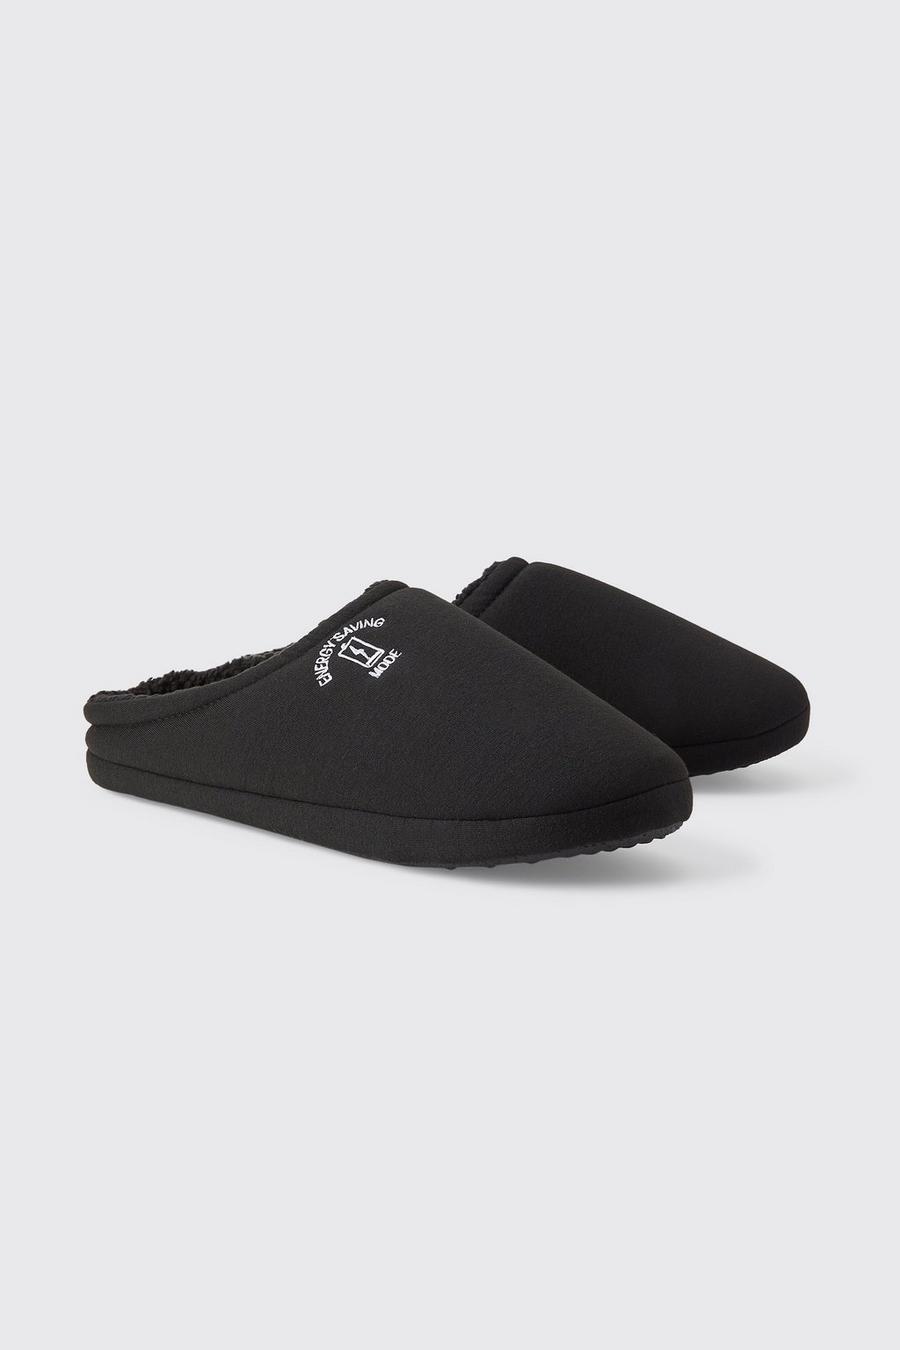 Black Embroidered Jersey Slippers